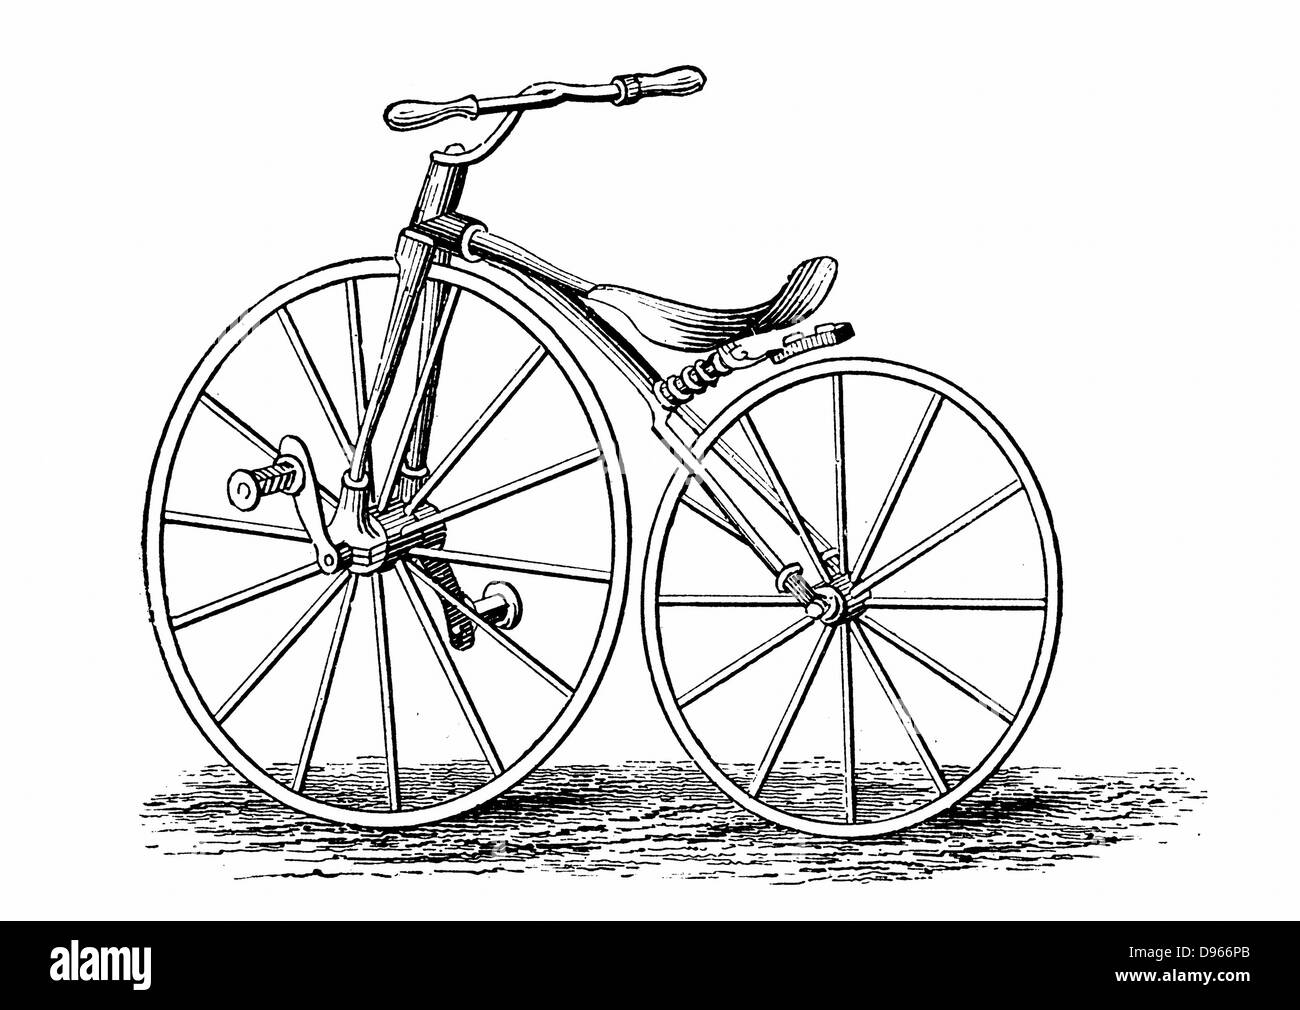 Pickering's crank-pedal driven bicycle, an American design. Wood engraving c1880. Stock Photo